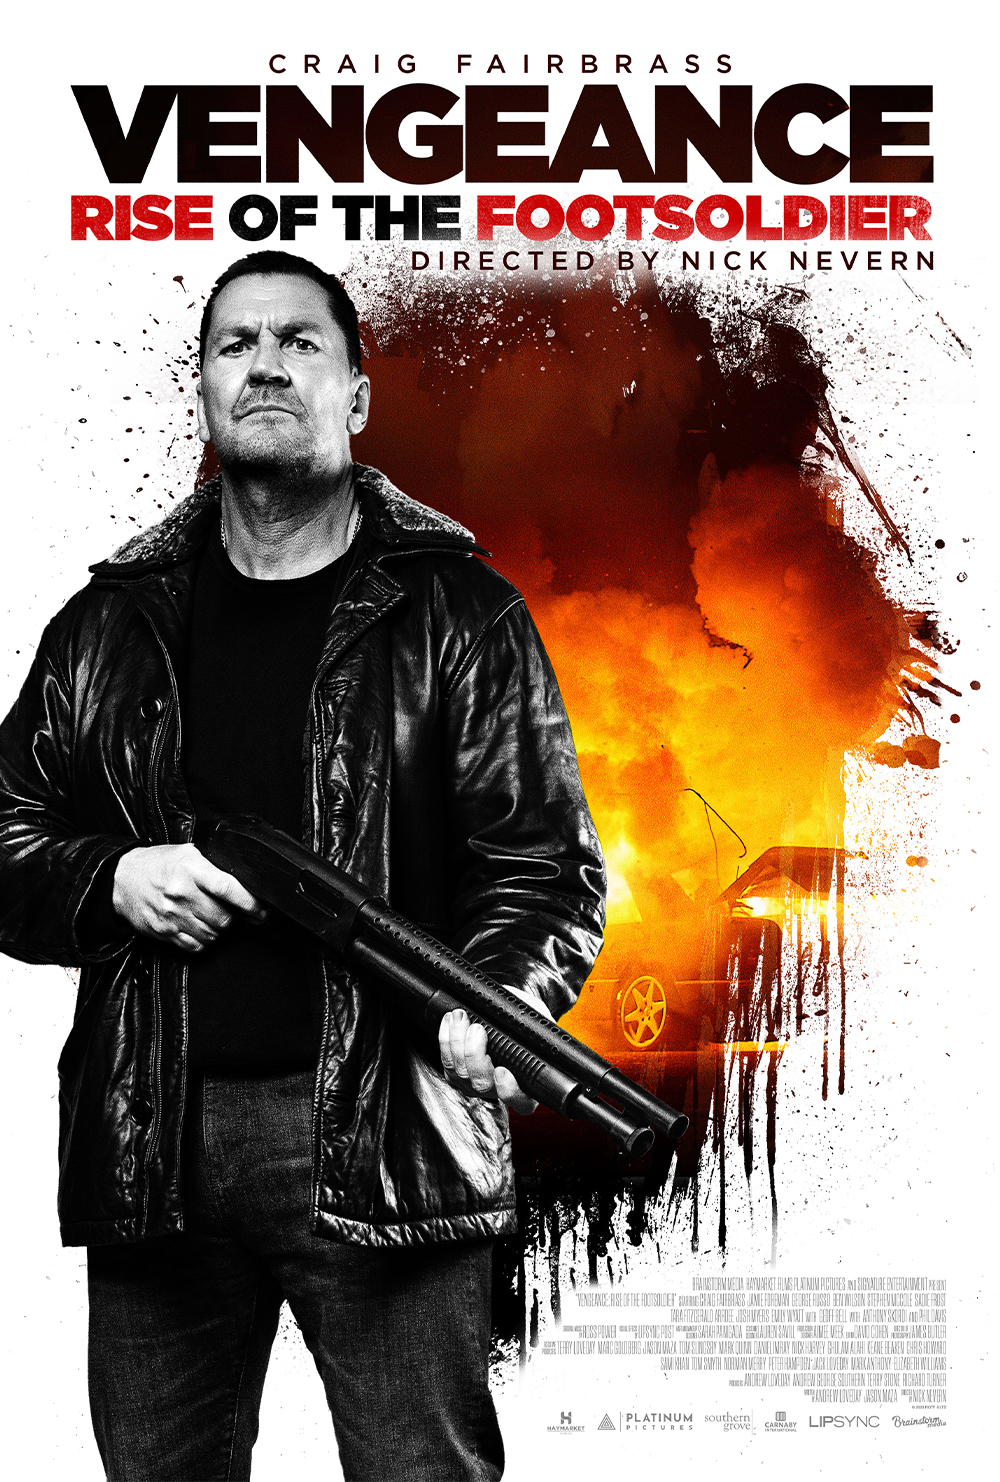 Vengeance: Rise of the Footsoldier